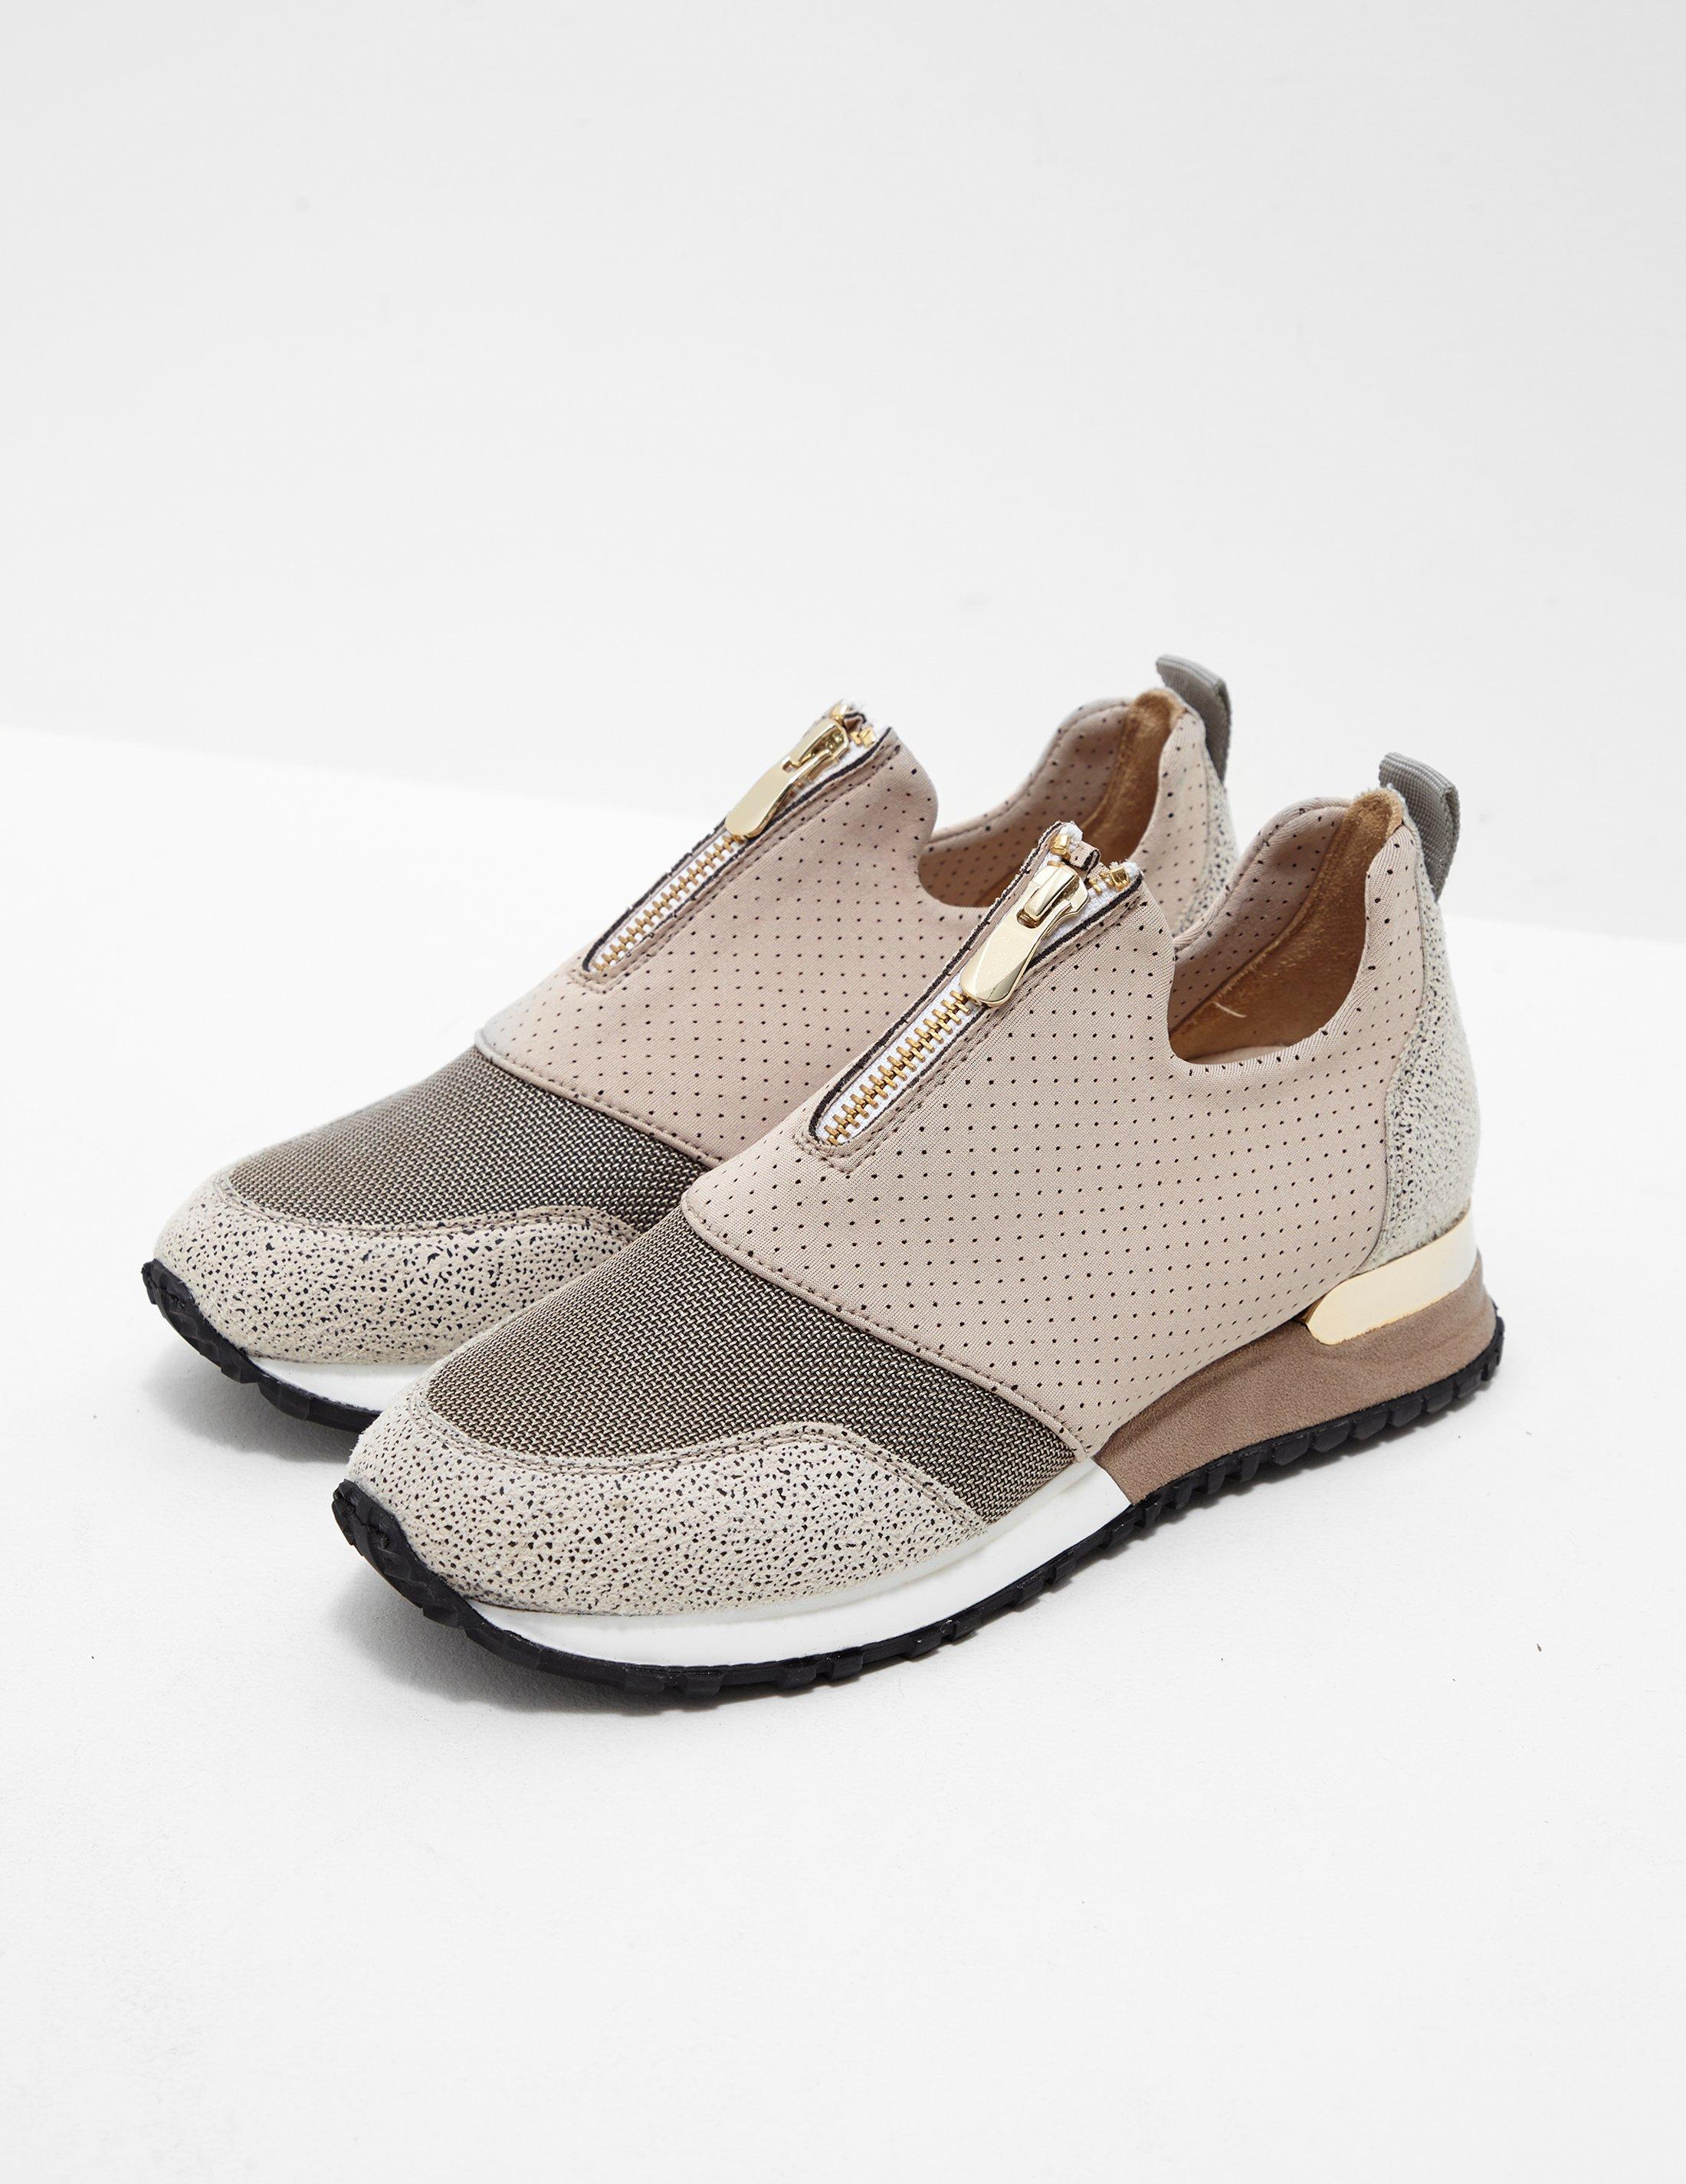 mallet shoes womens